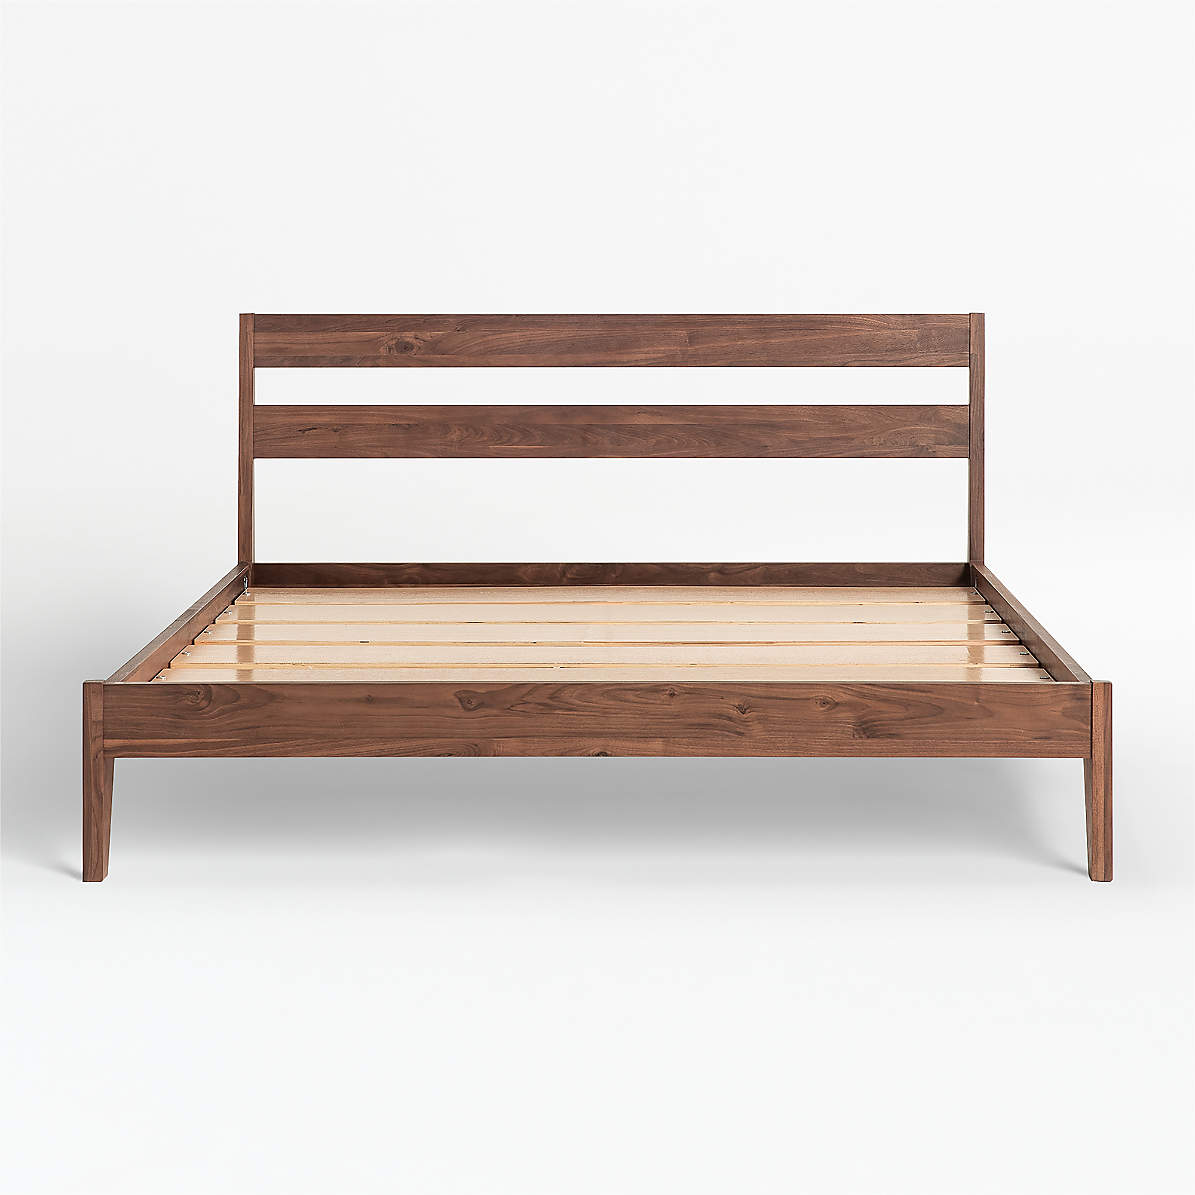 Tuft Needle King Solid Walnut Bed, Tuft And Needle King Size Bed Dimensions